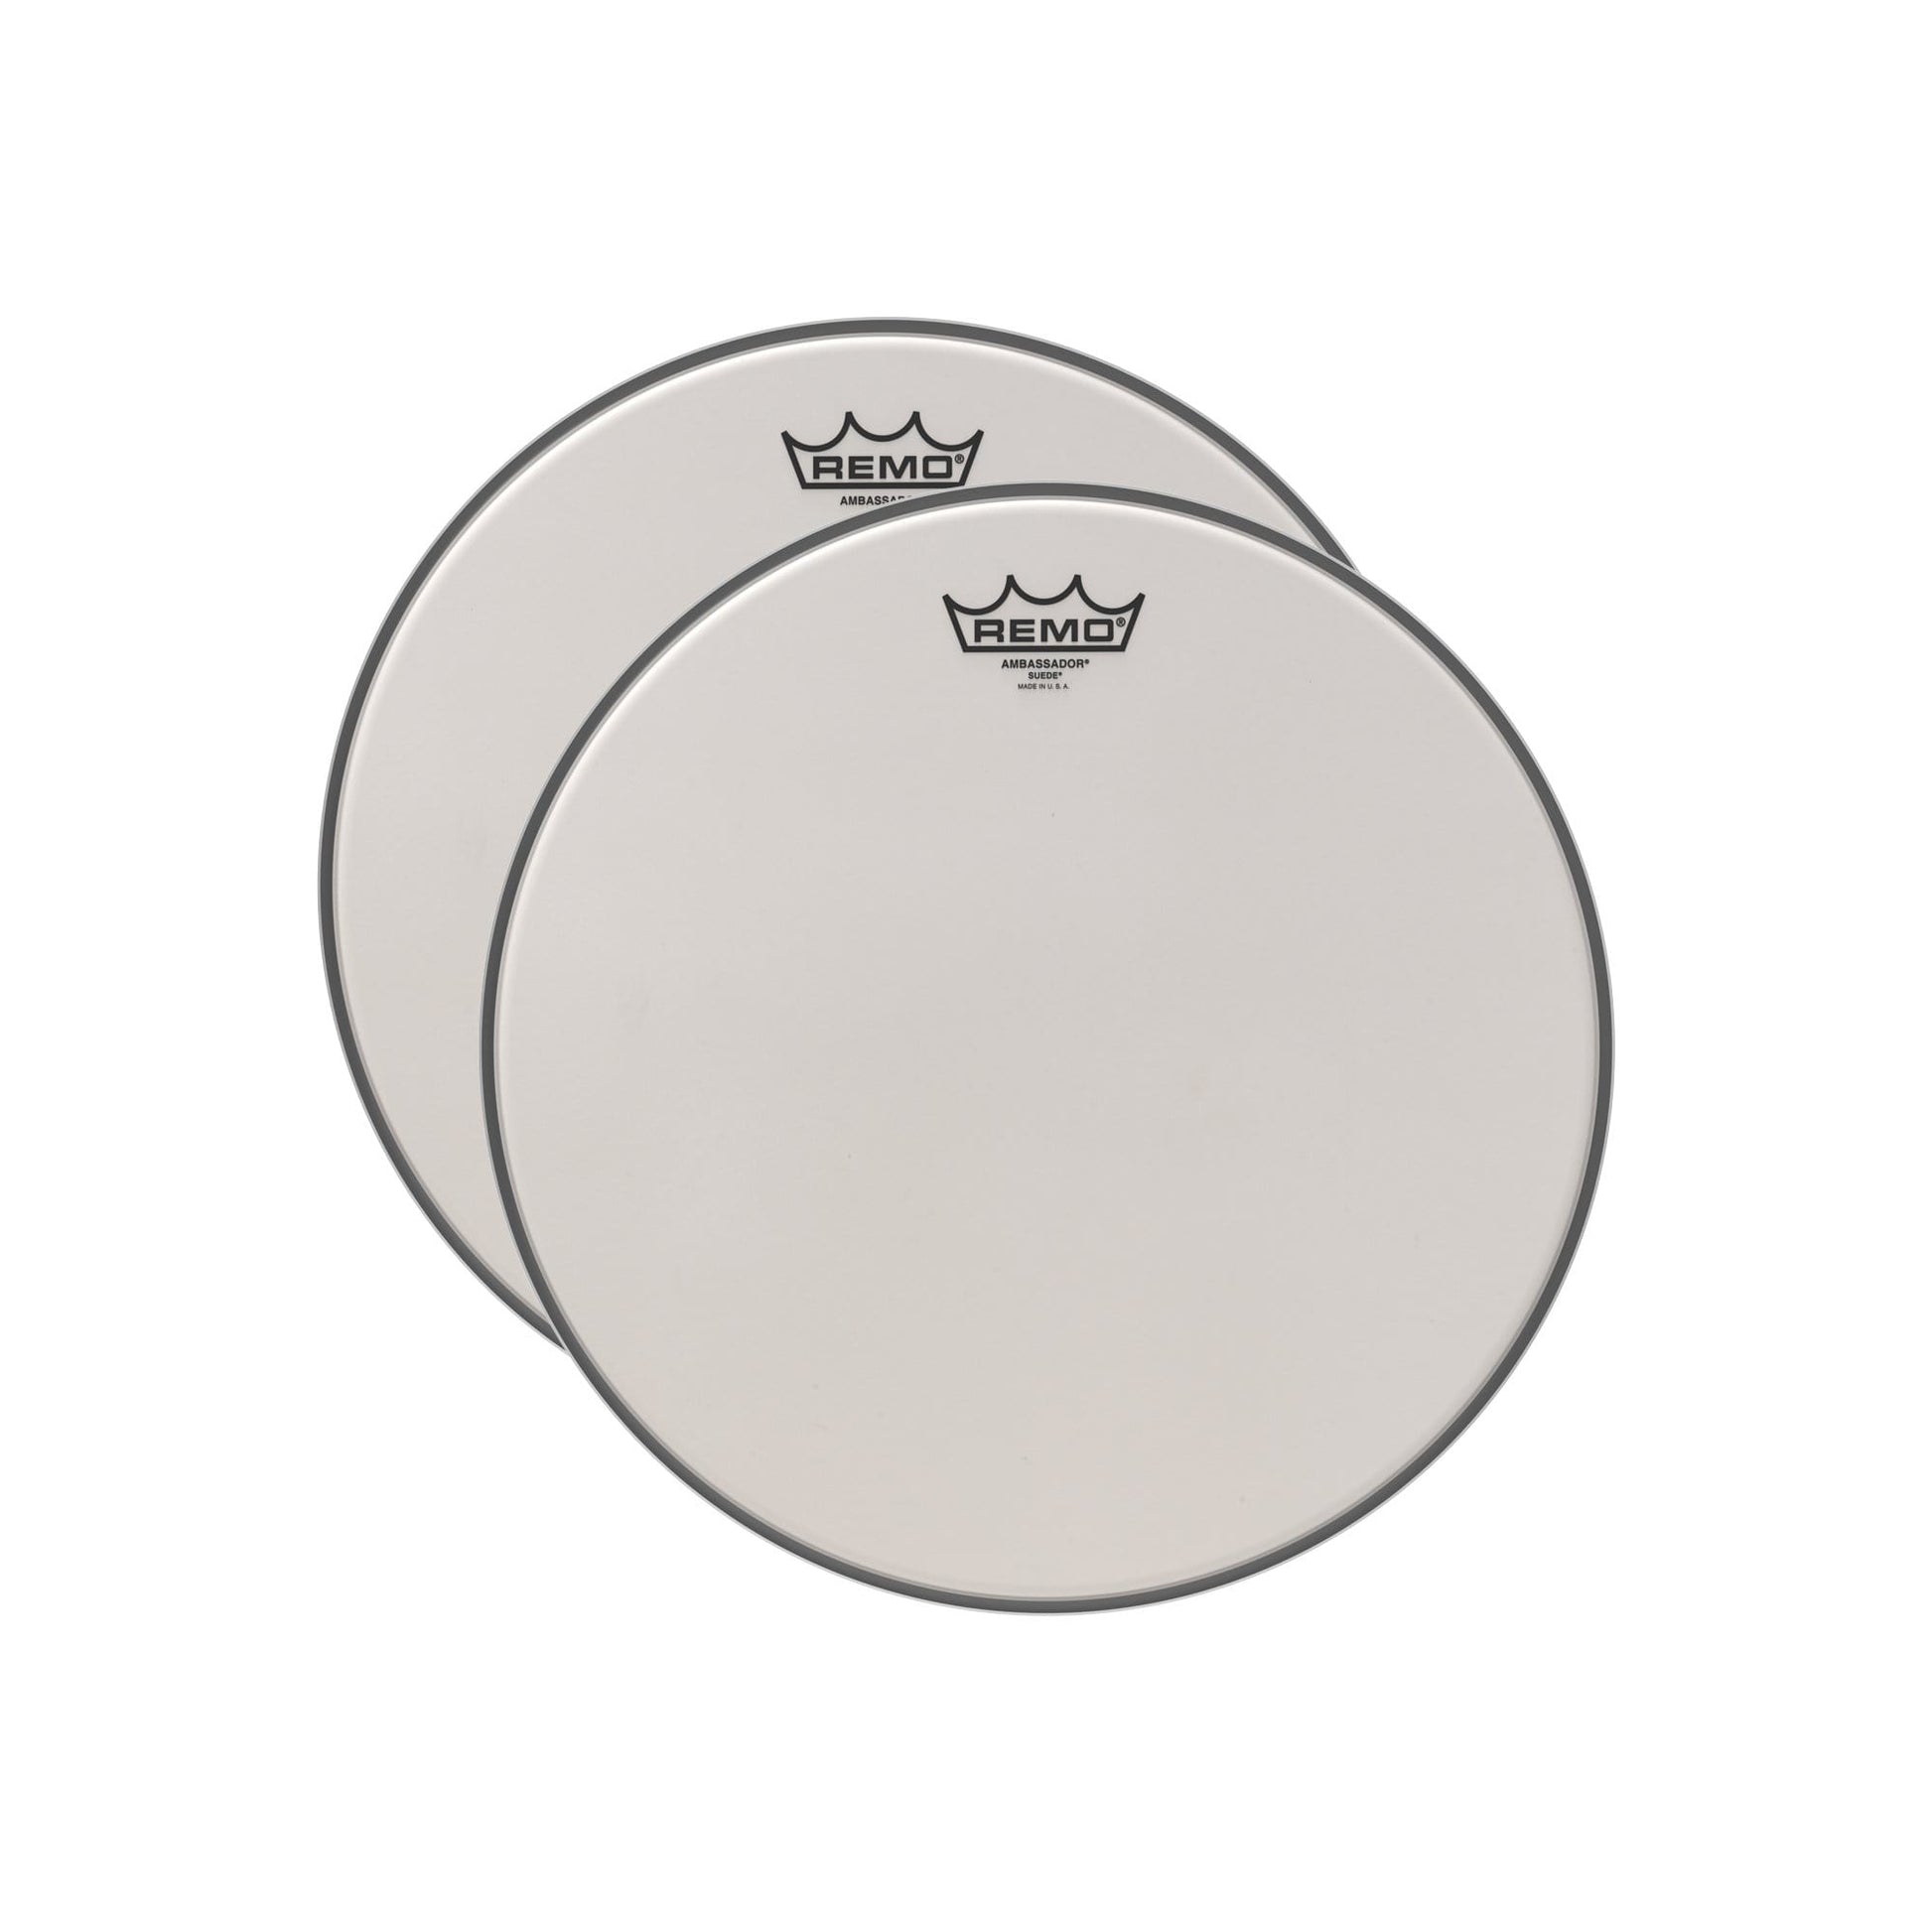 Remo 14" Ambassador Suede Drumhead (2 Pack Bundle) Drums and Percussion / Parts and Accessories / Heads